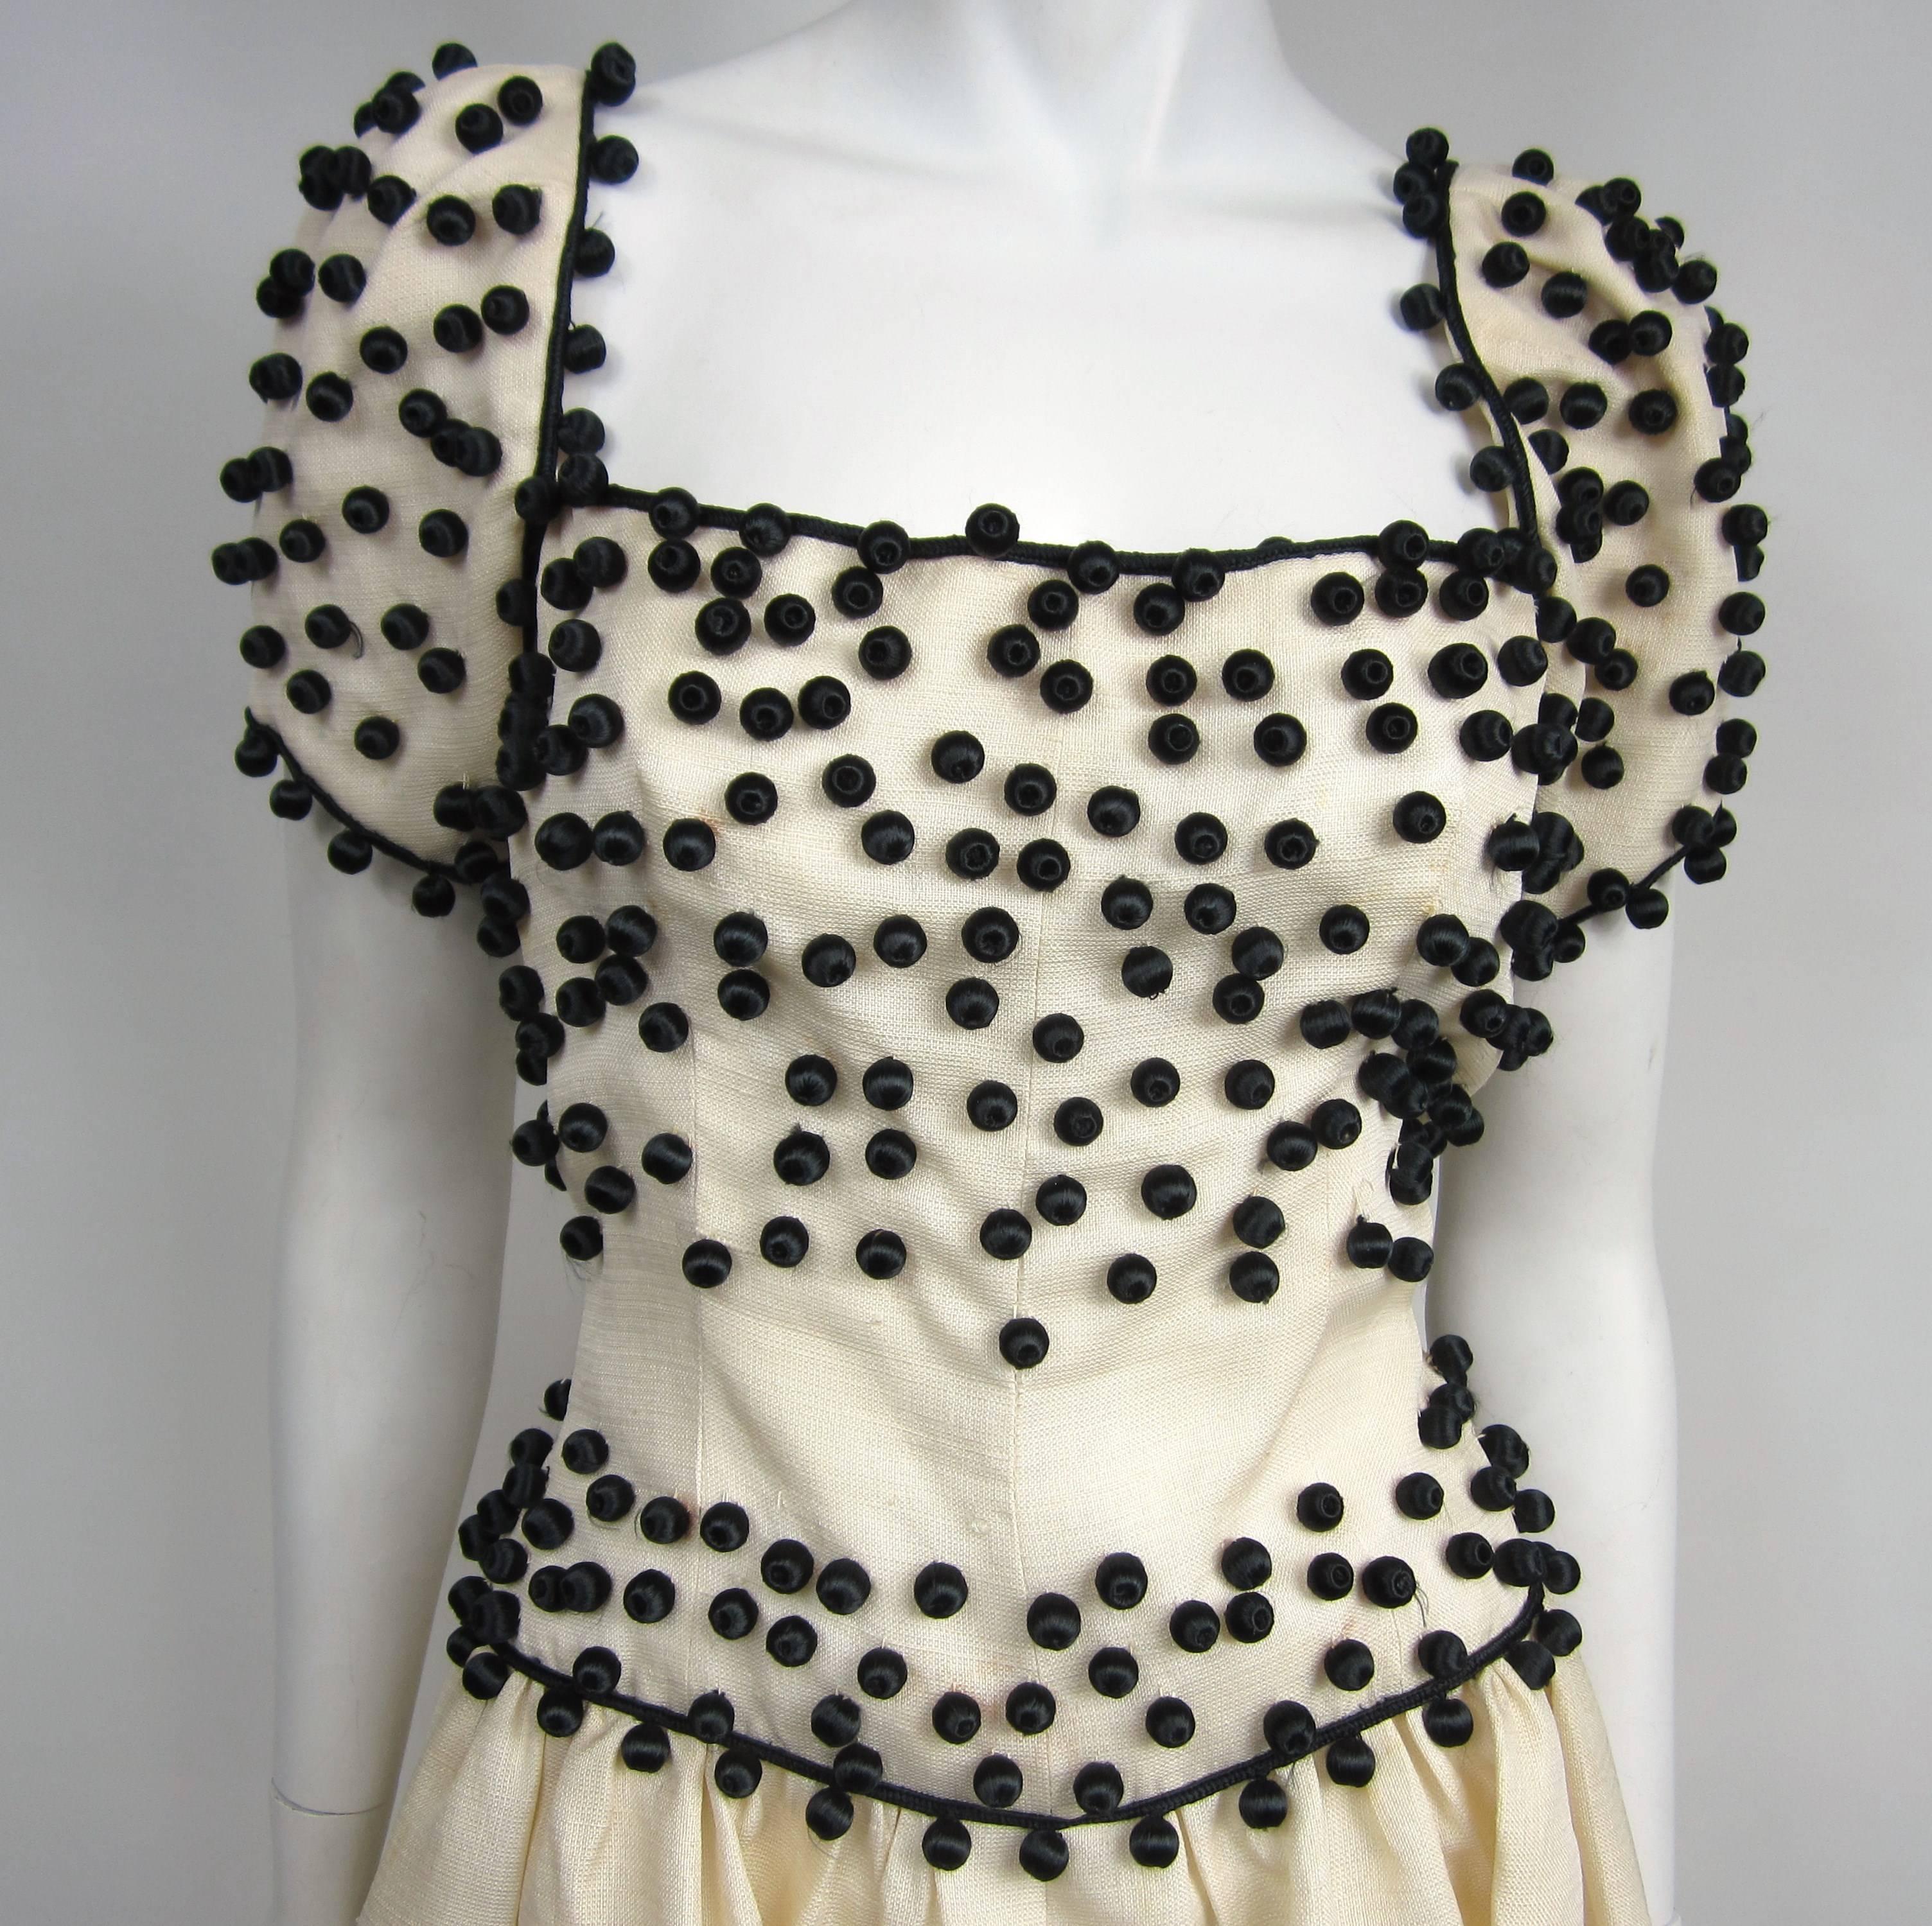 Givenchy Cream / Black Embellished Dress out of the same collection of our YSL Russian pieces. This is stunning in person. Bodice is lined, zippers up the back. Full inverted pleated skirt, low back and cap sleeves.  Just stunning. The dress